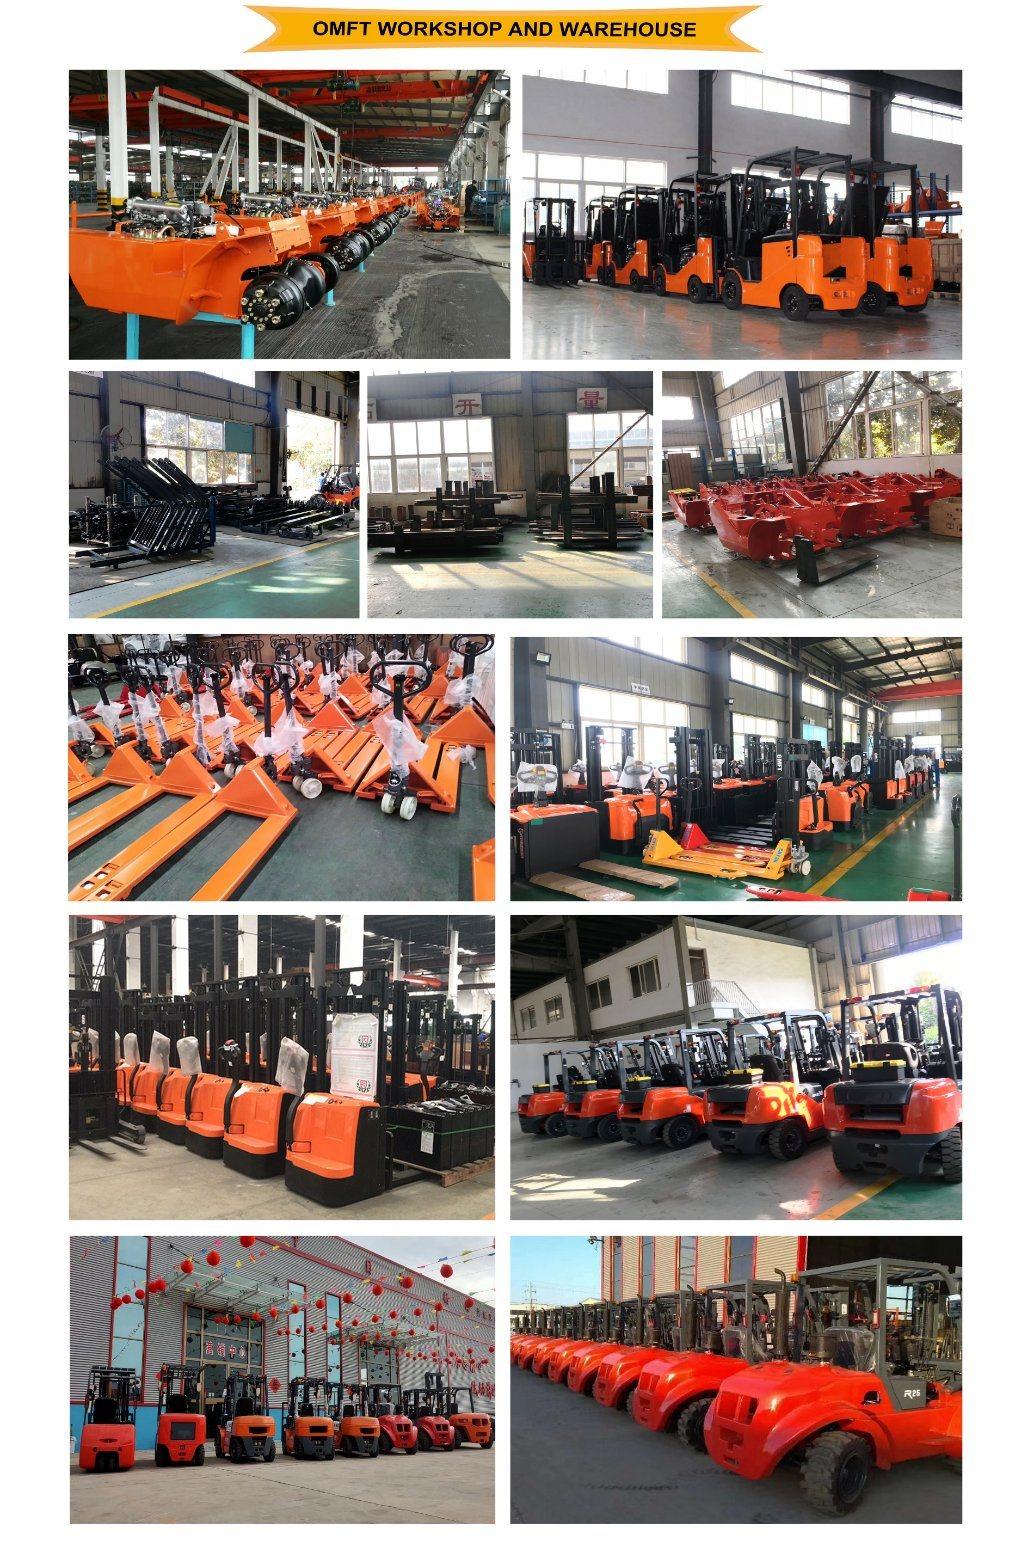 48V 1ton/1.5ton/2ton/2.5ton Stand-on or Seated Electric Reach Truck with Battery and Charger 3m 3.5m 4m 4.5m 5m 5.5m 6m 7m 8m 9m 10m 11m 12m Mast